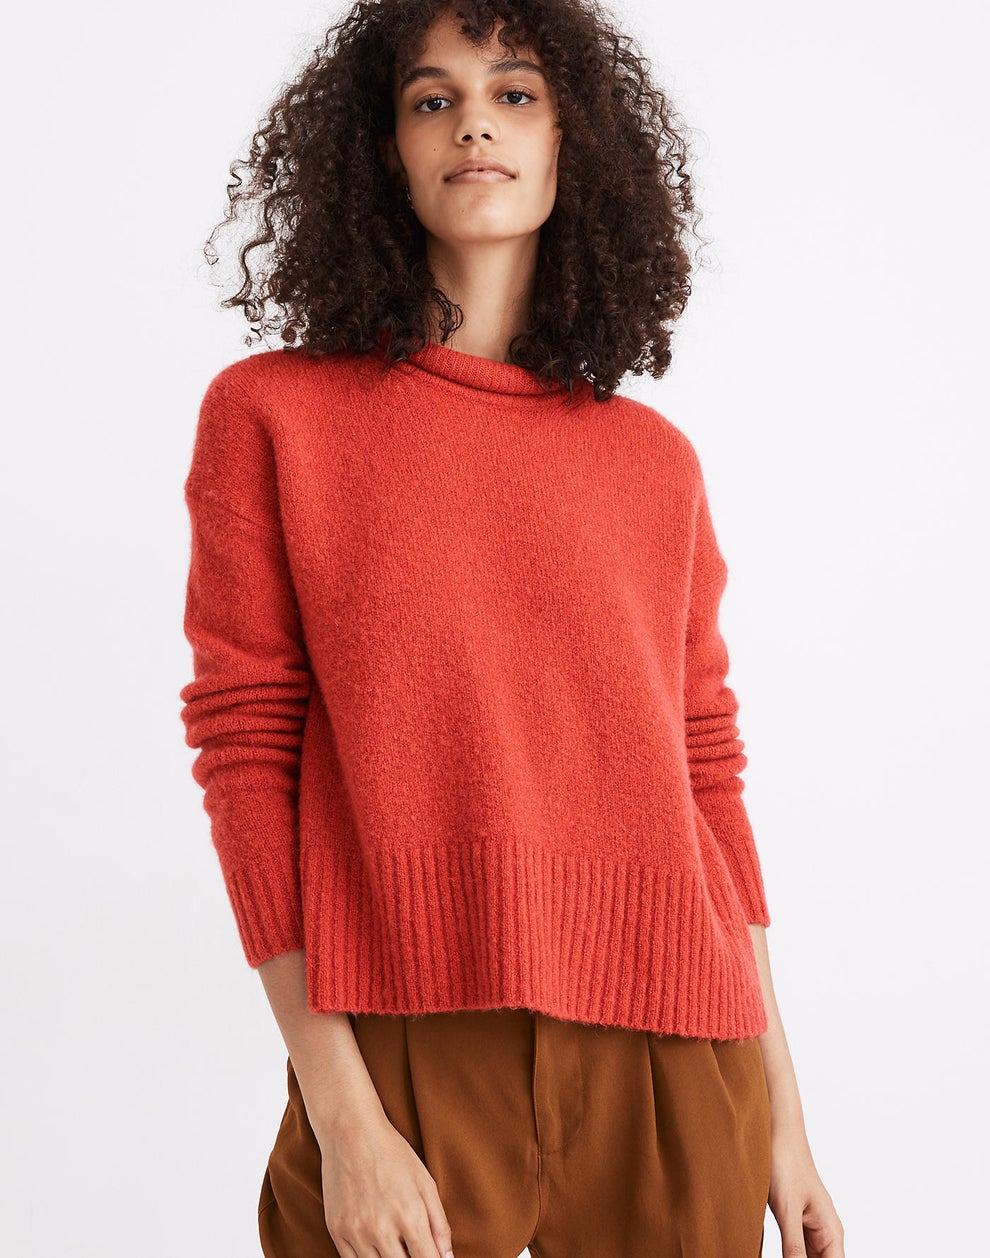 Madewell's Secret Stock Sale Is Here And That Means Up To 70% Off ...